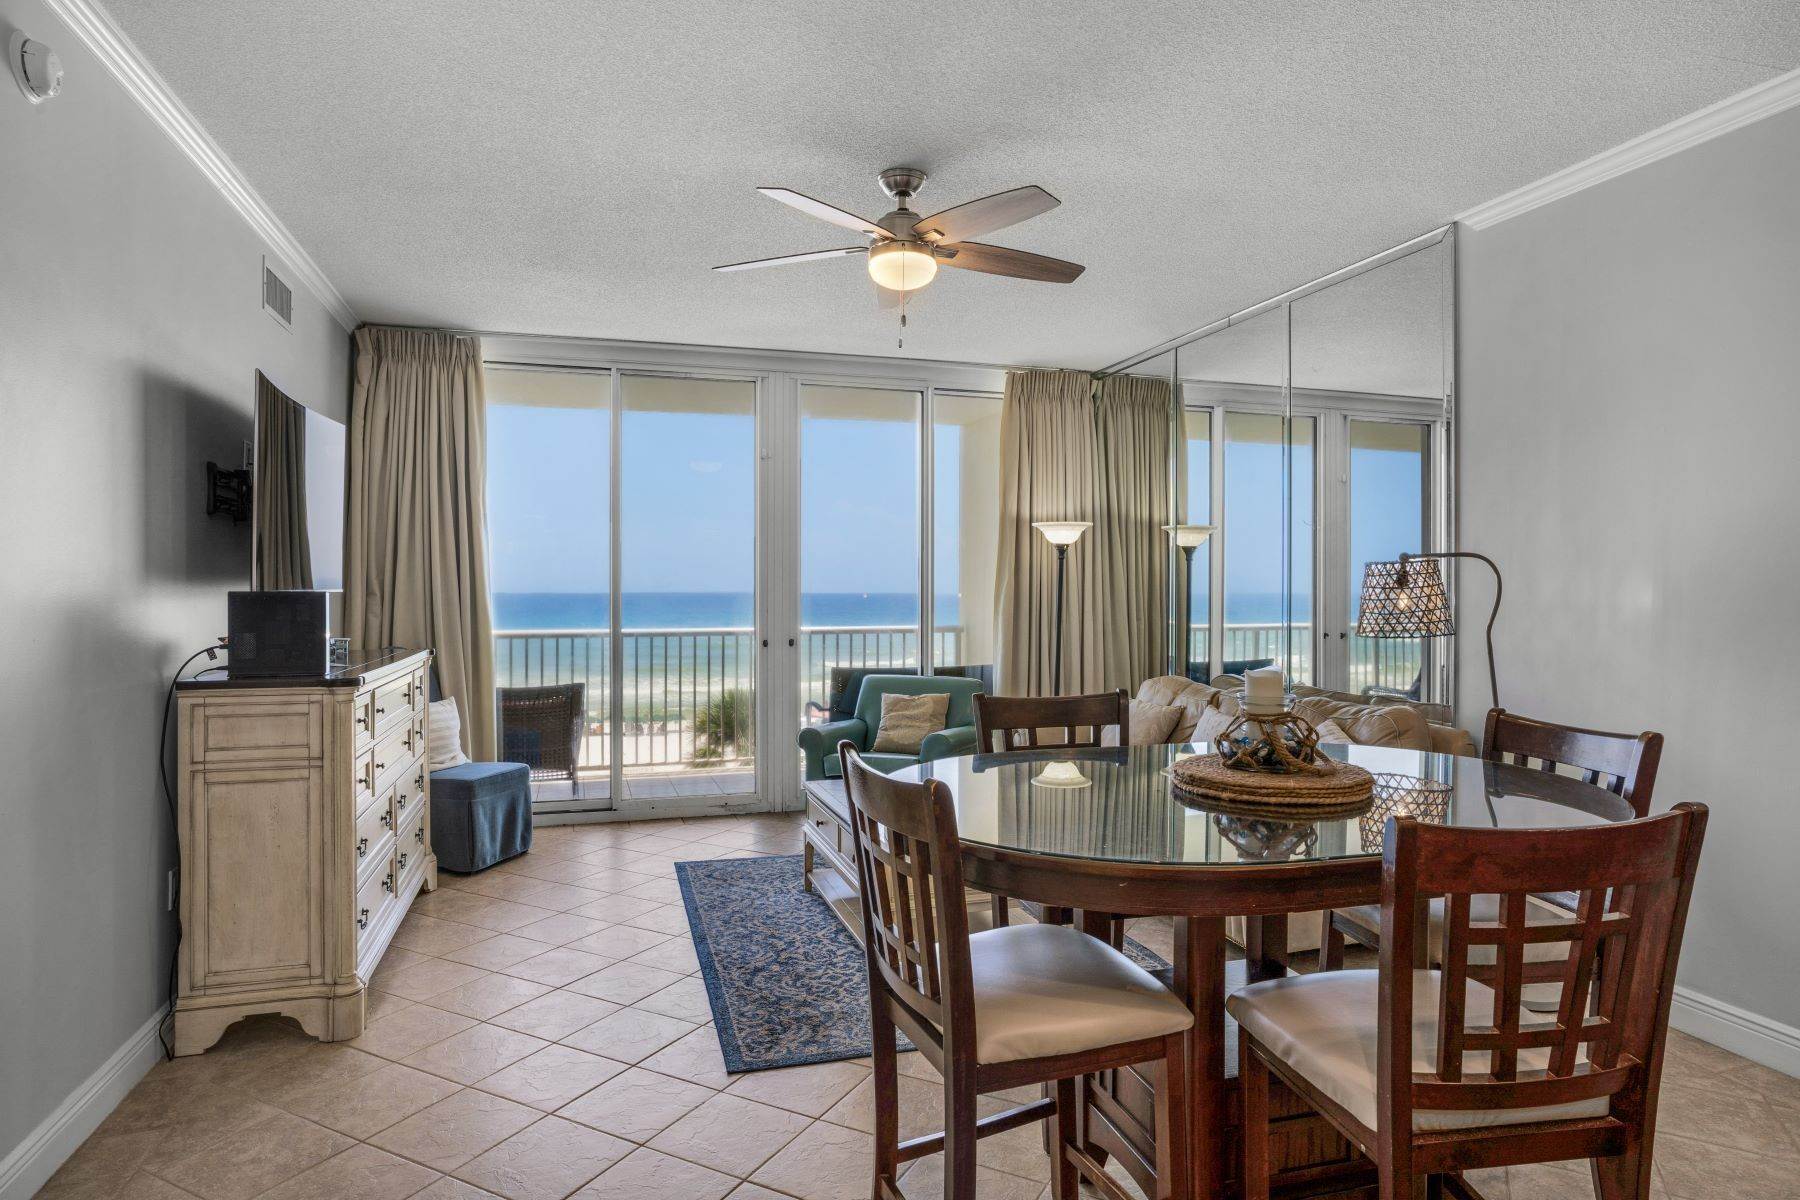 Condominiums for Sale at Fully Furnished Condo With Gulf Views And Resort Amenities 590 Santa Rosa Boulevard, 418 Fort Walton Beach, Florida 32548 United States